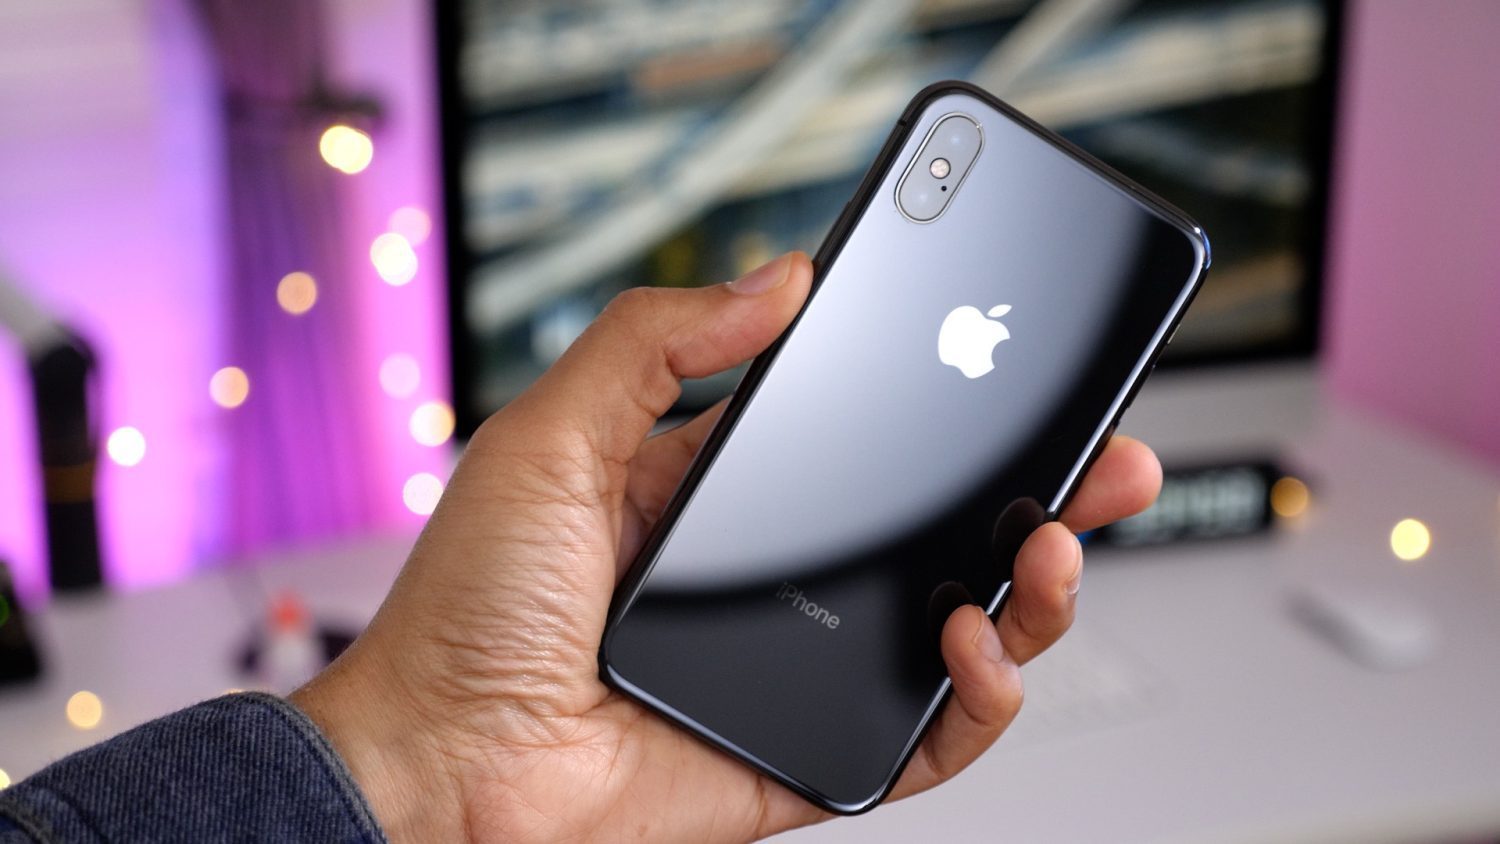 vs iPhone 11 comparison: Should you upgrade? 9to5Mac